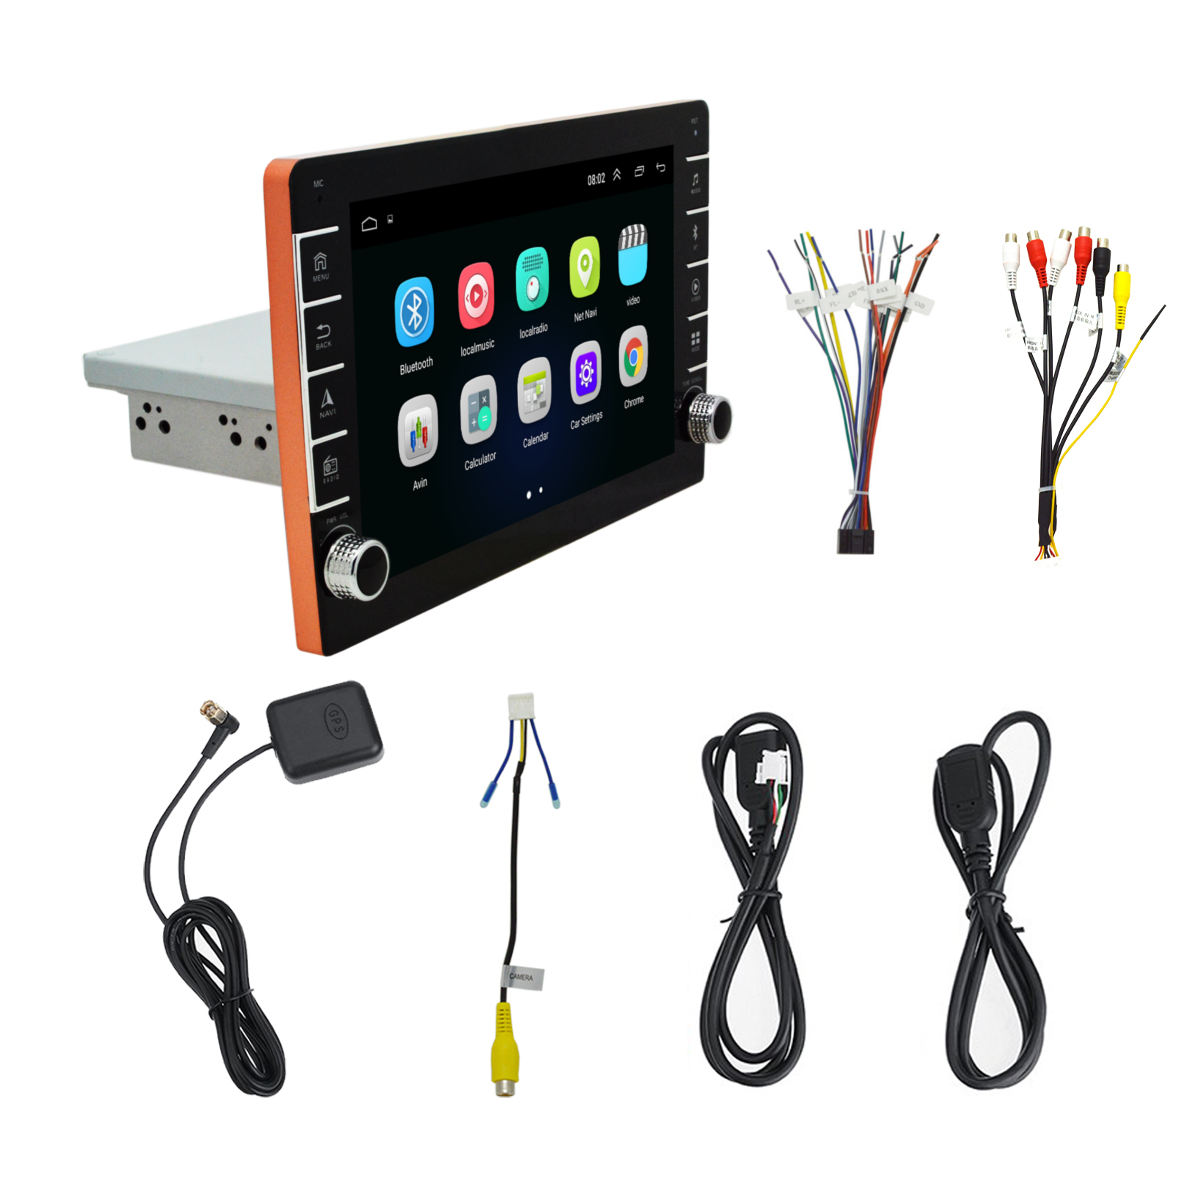 8Inch-9Inch-1Din-For-Android-81-Car-Mlitimedia-Player-Adjustable-Screen-Quad-Core-116G-WIFI-GPS-FM-S-1691537